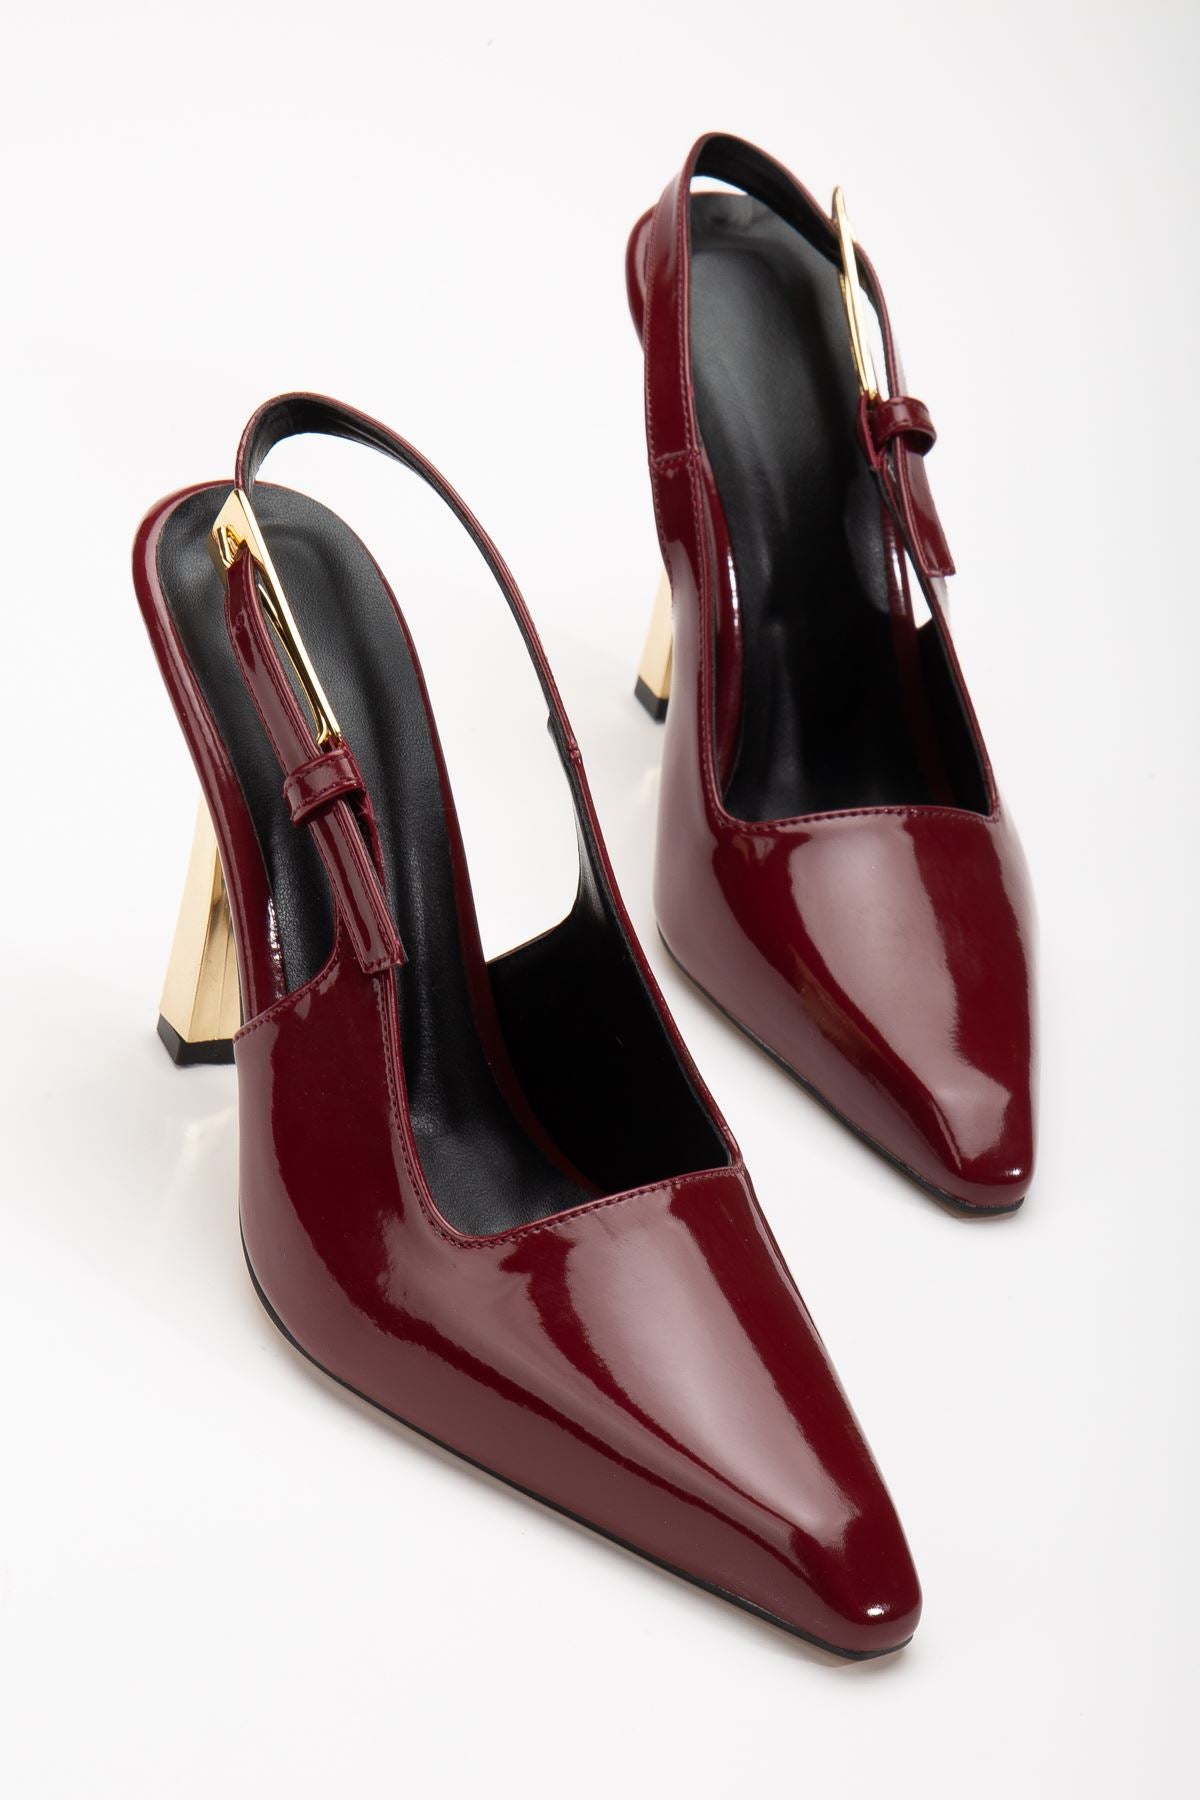 Minni Claret Red Patent Leather Gold Detailed Blunt Toe Women's Heeled Shoes - STREETMODE™